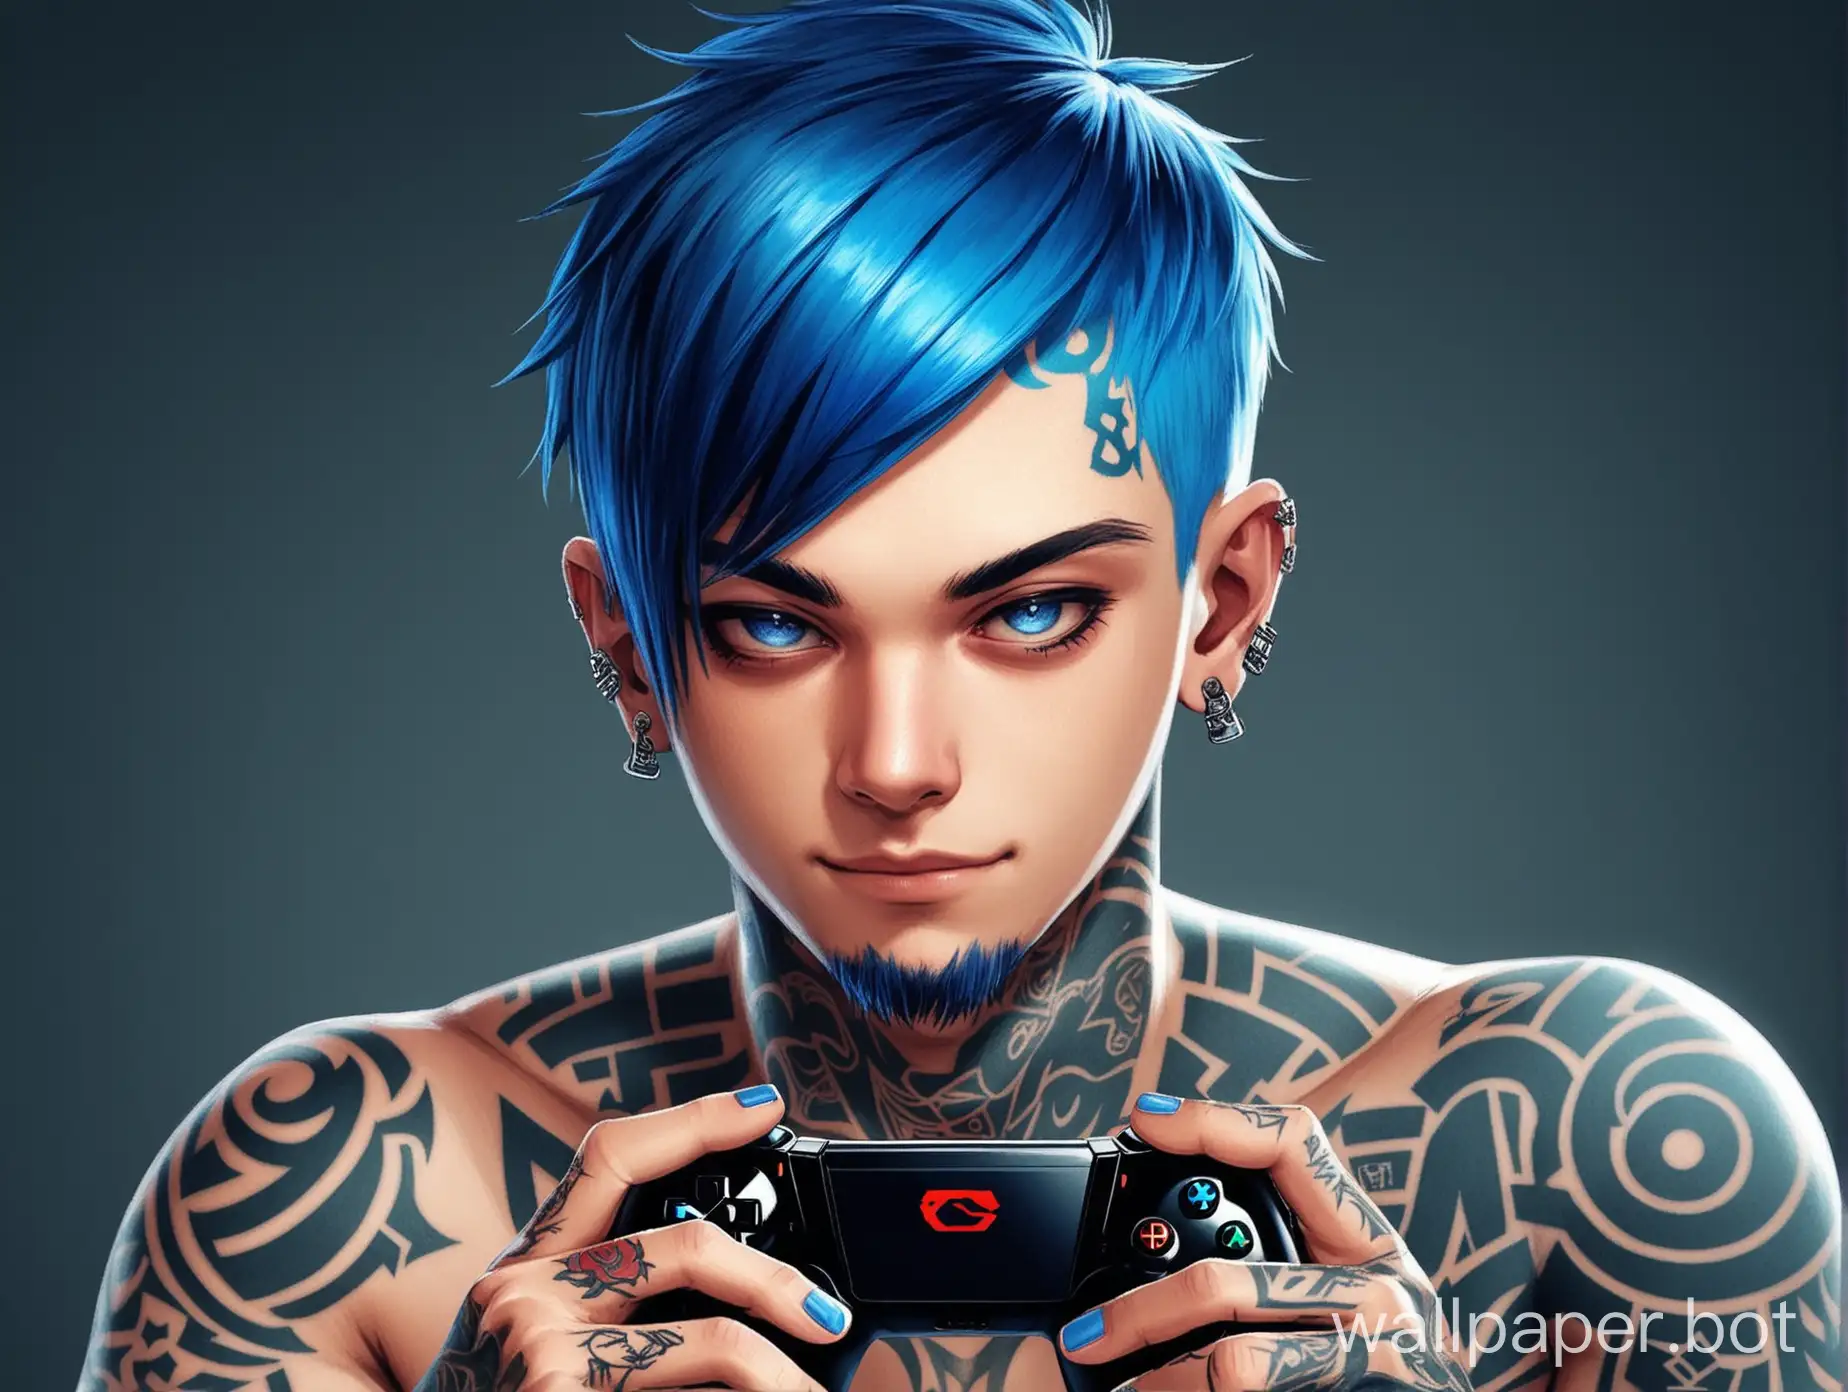 gamer guy with short blue hair and tattoos